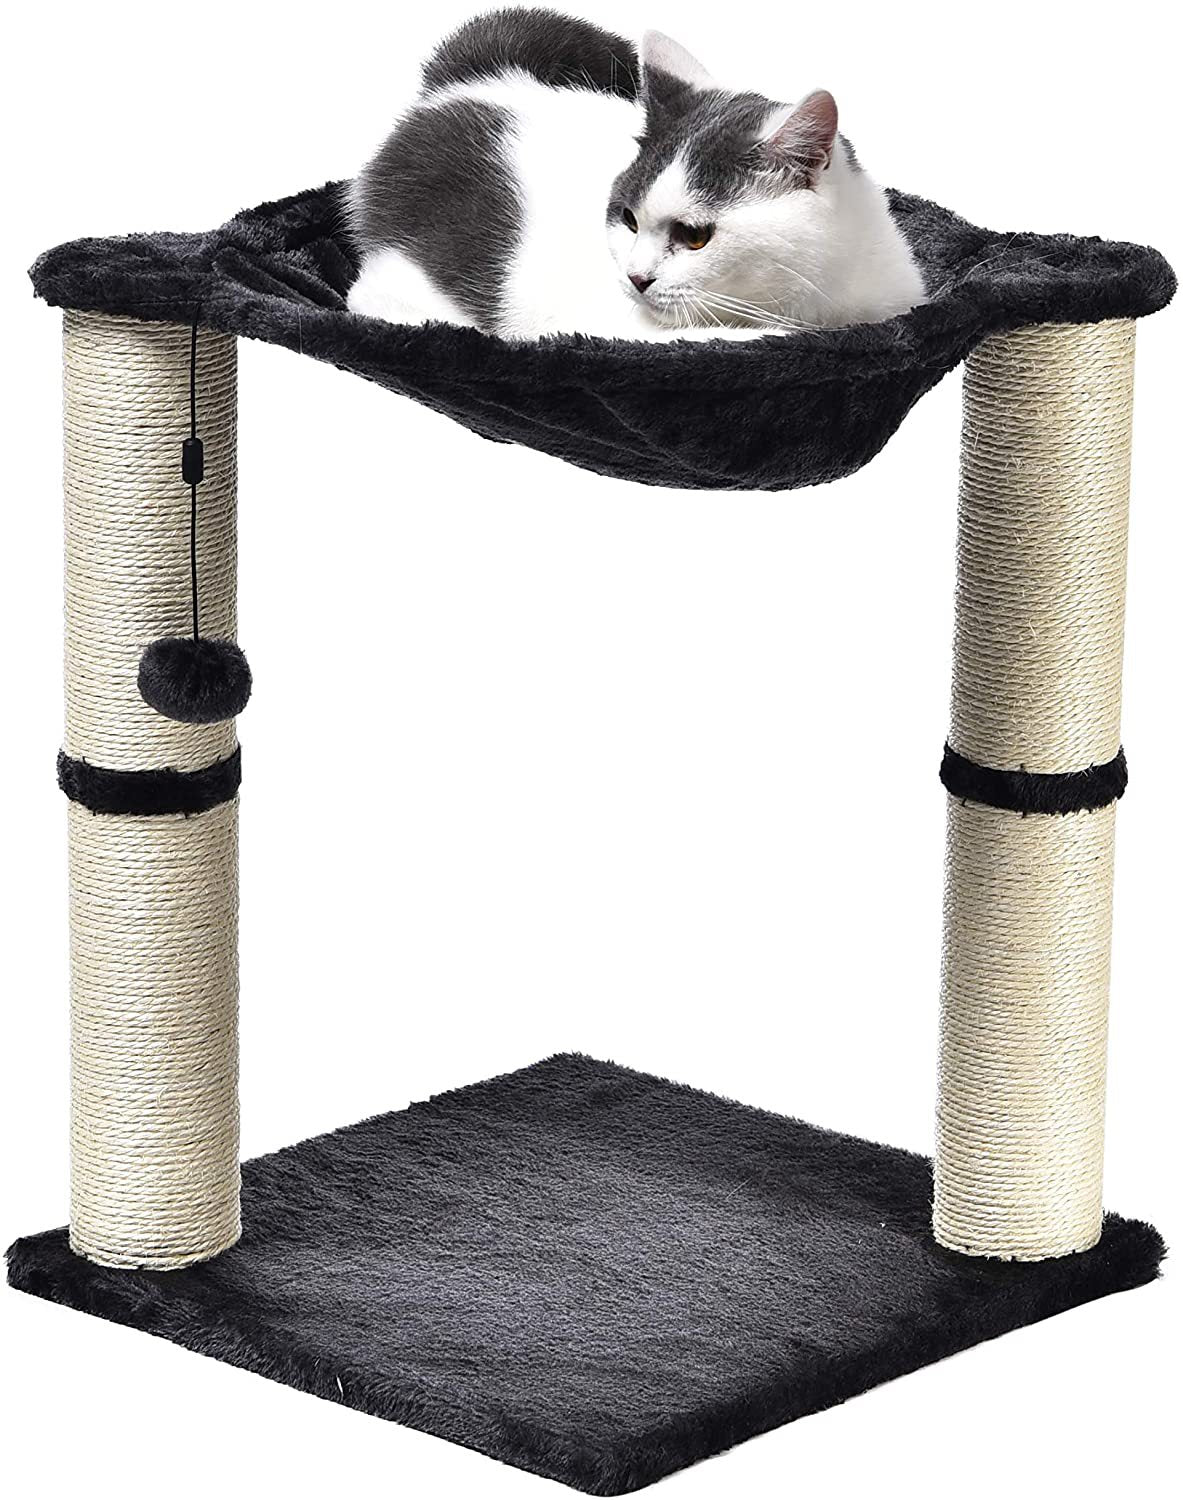 Scratching Post with an Integrated Hammock